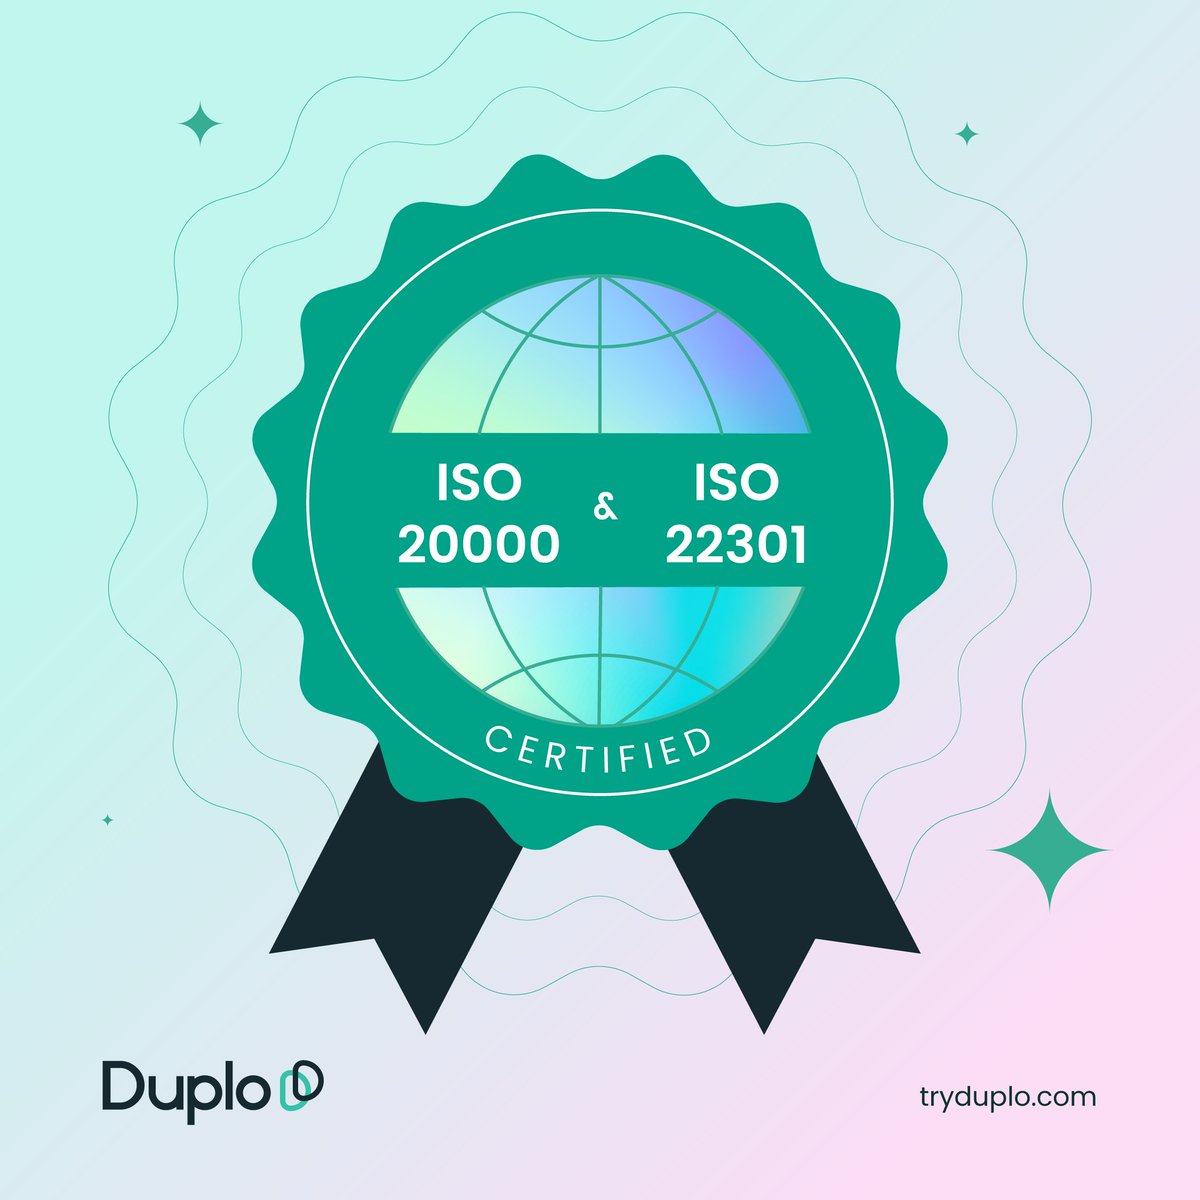 Today, we're thrilled to announce a significant milestone for our organization. Duplo recently received the ISO 22301: 2019 and ISO/IEC 20000-1 :2018 certifications. Read more about the new certifications here- hubs.li/Q02mvydH0